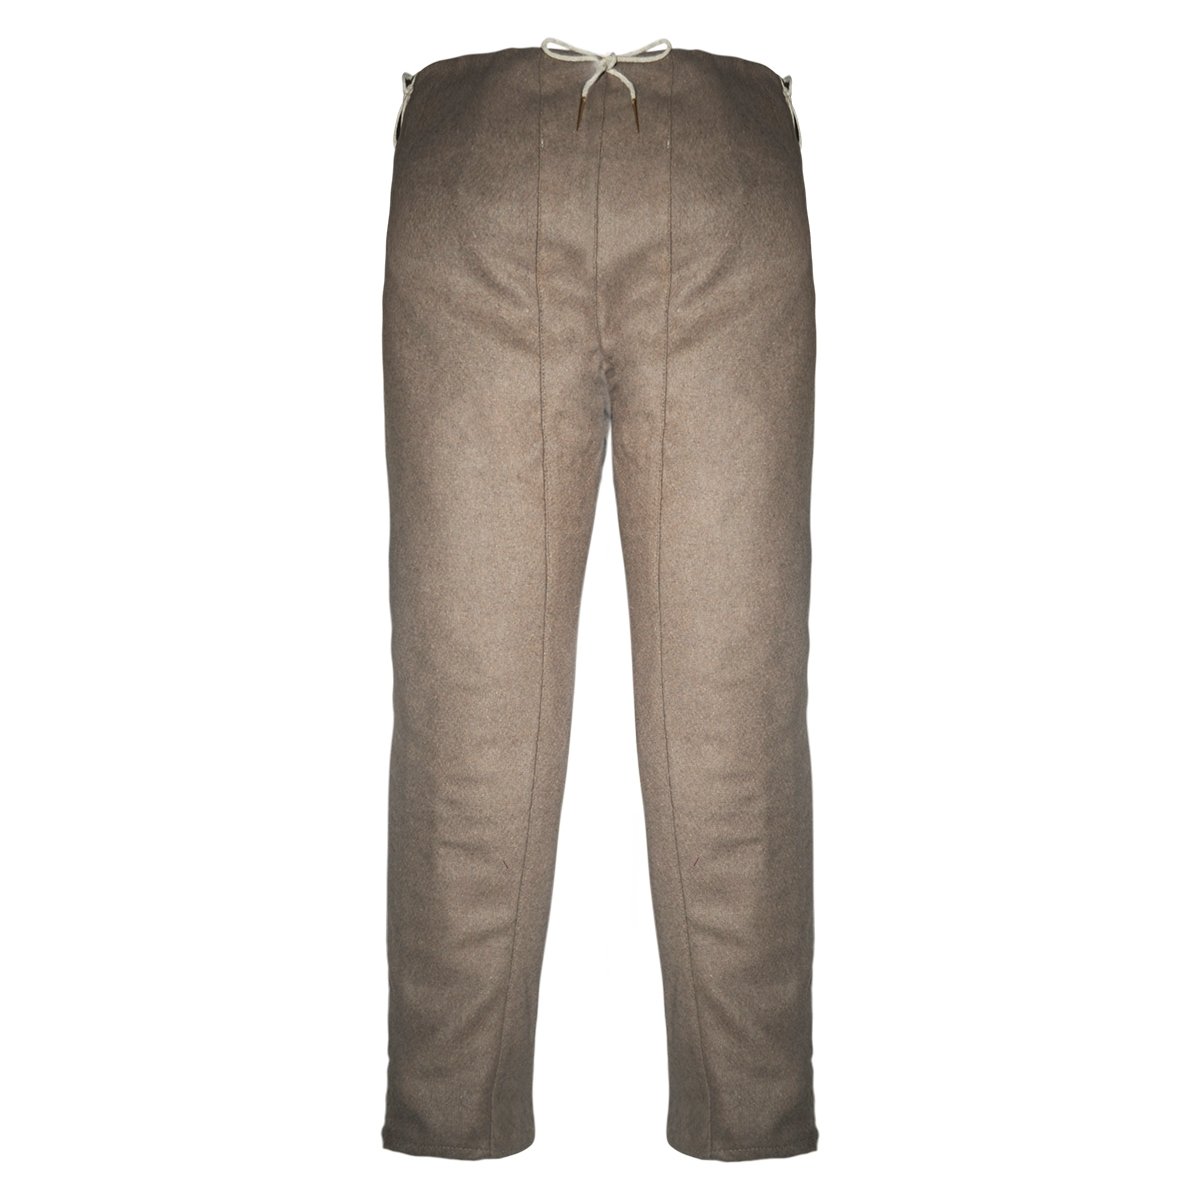 Man's 15th C. Trousers - Natural Brown, Size S